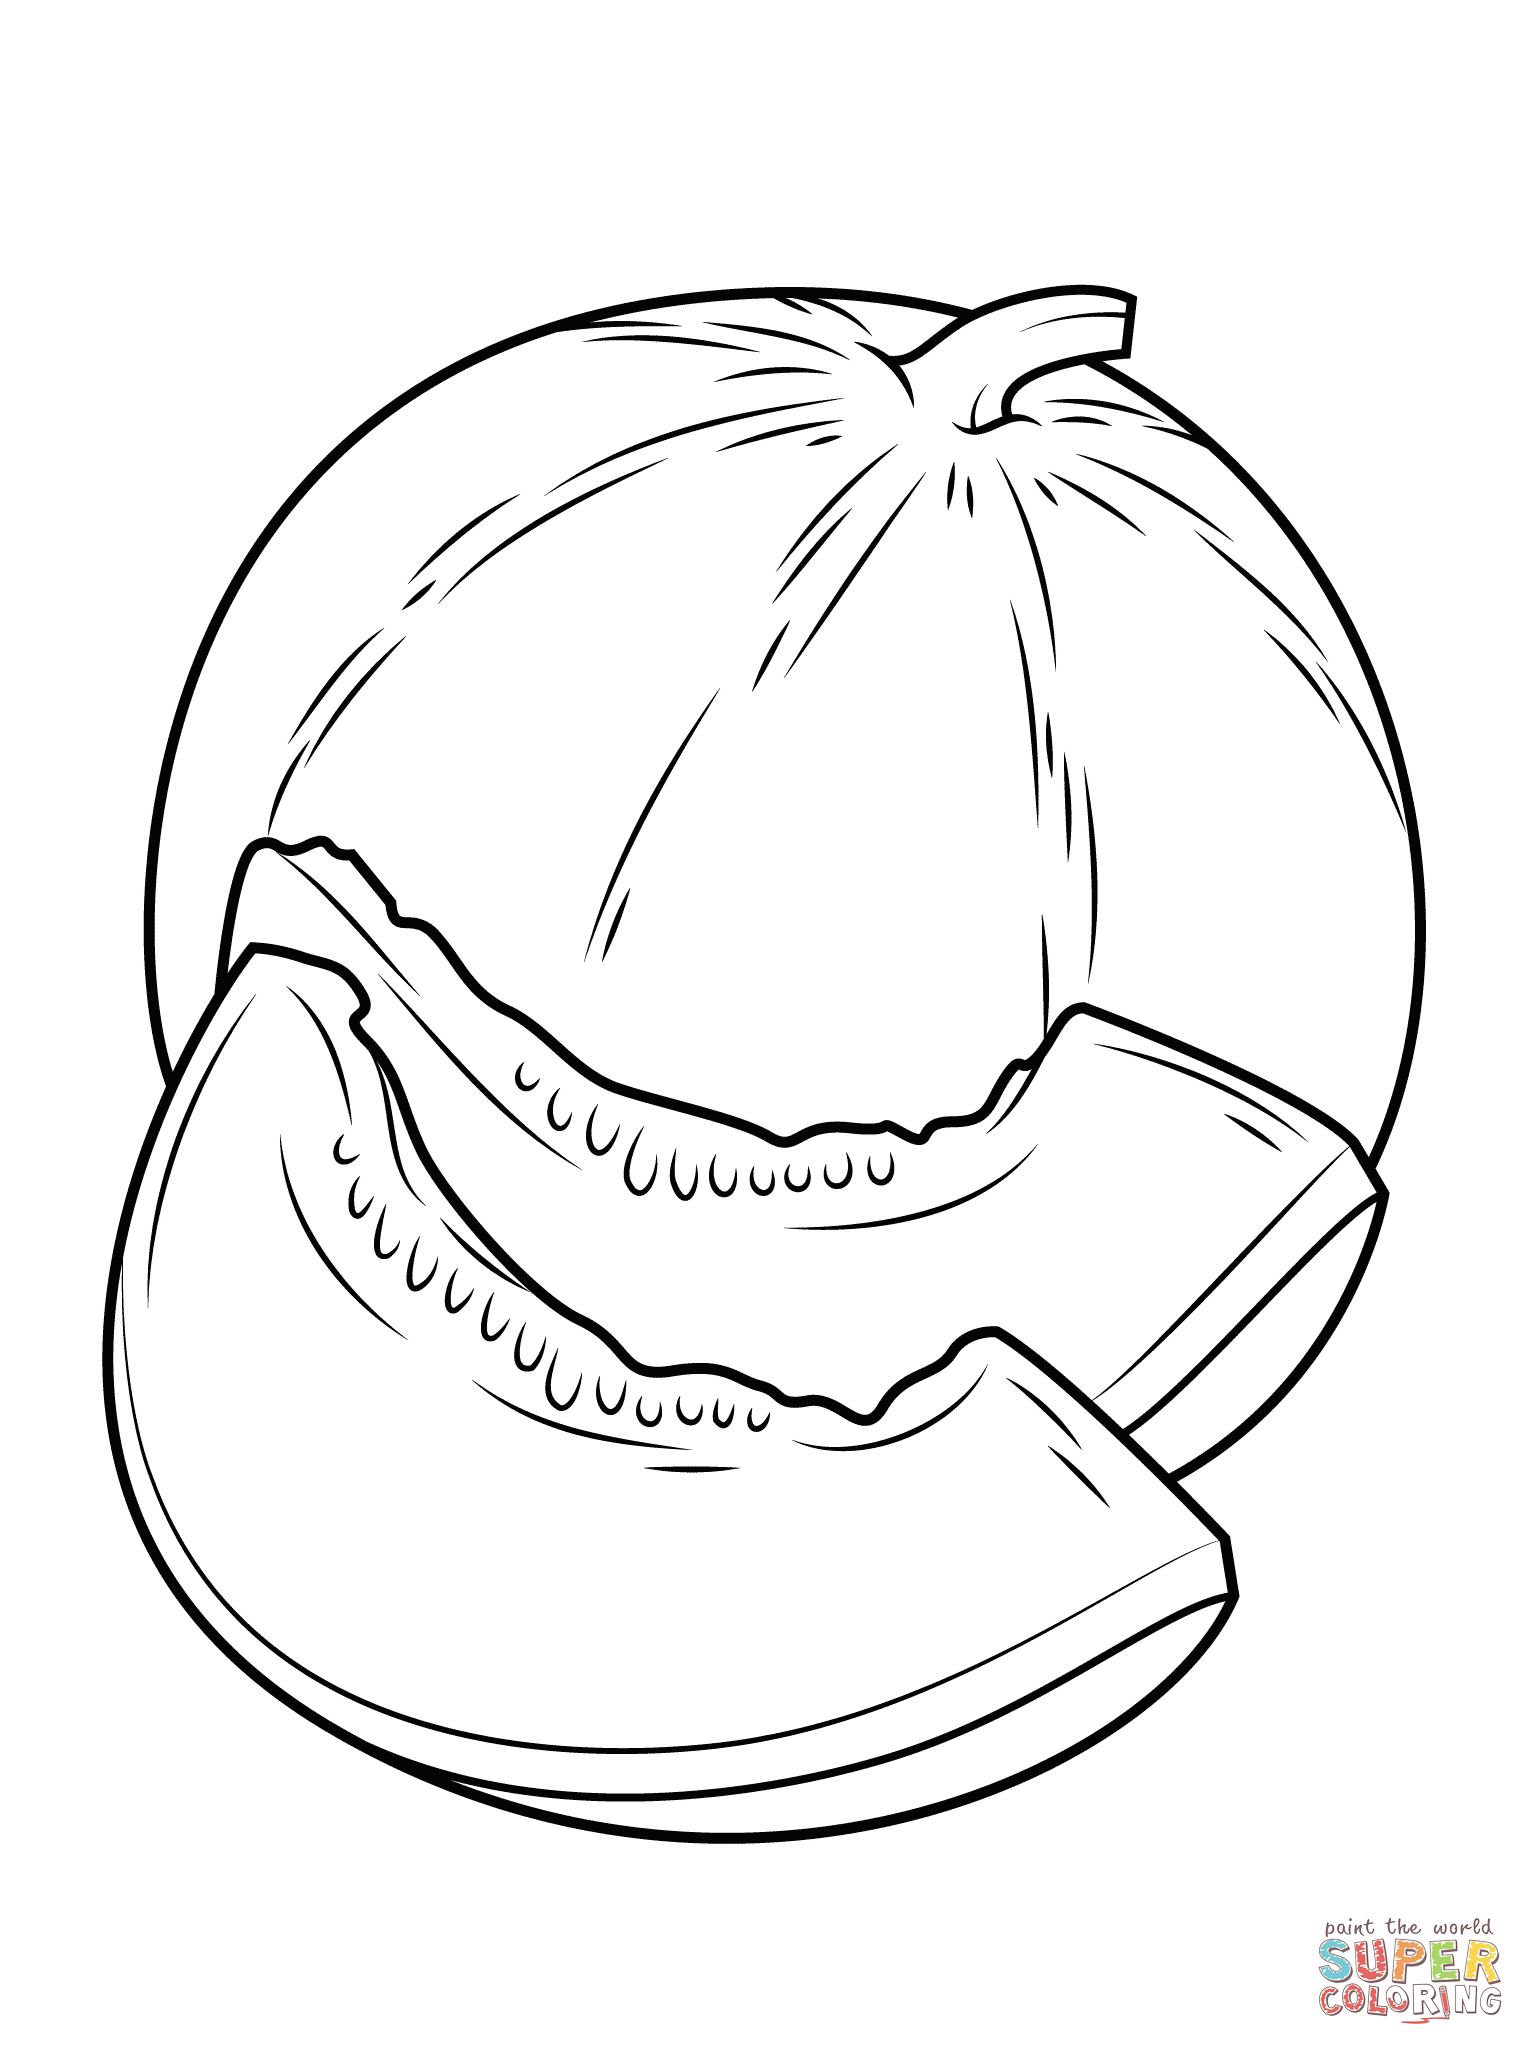 Melon coloring page | Free Printable Coloring Pages